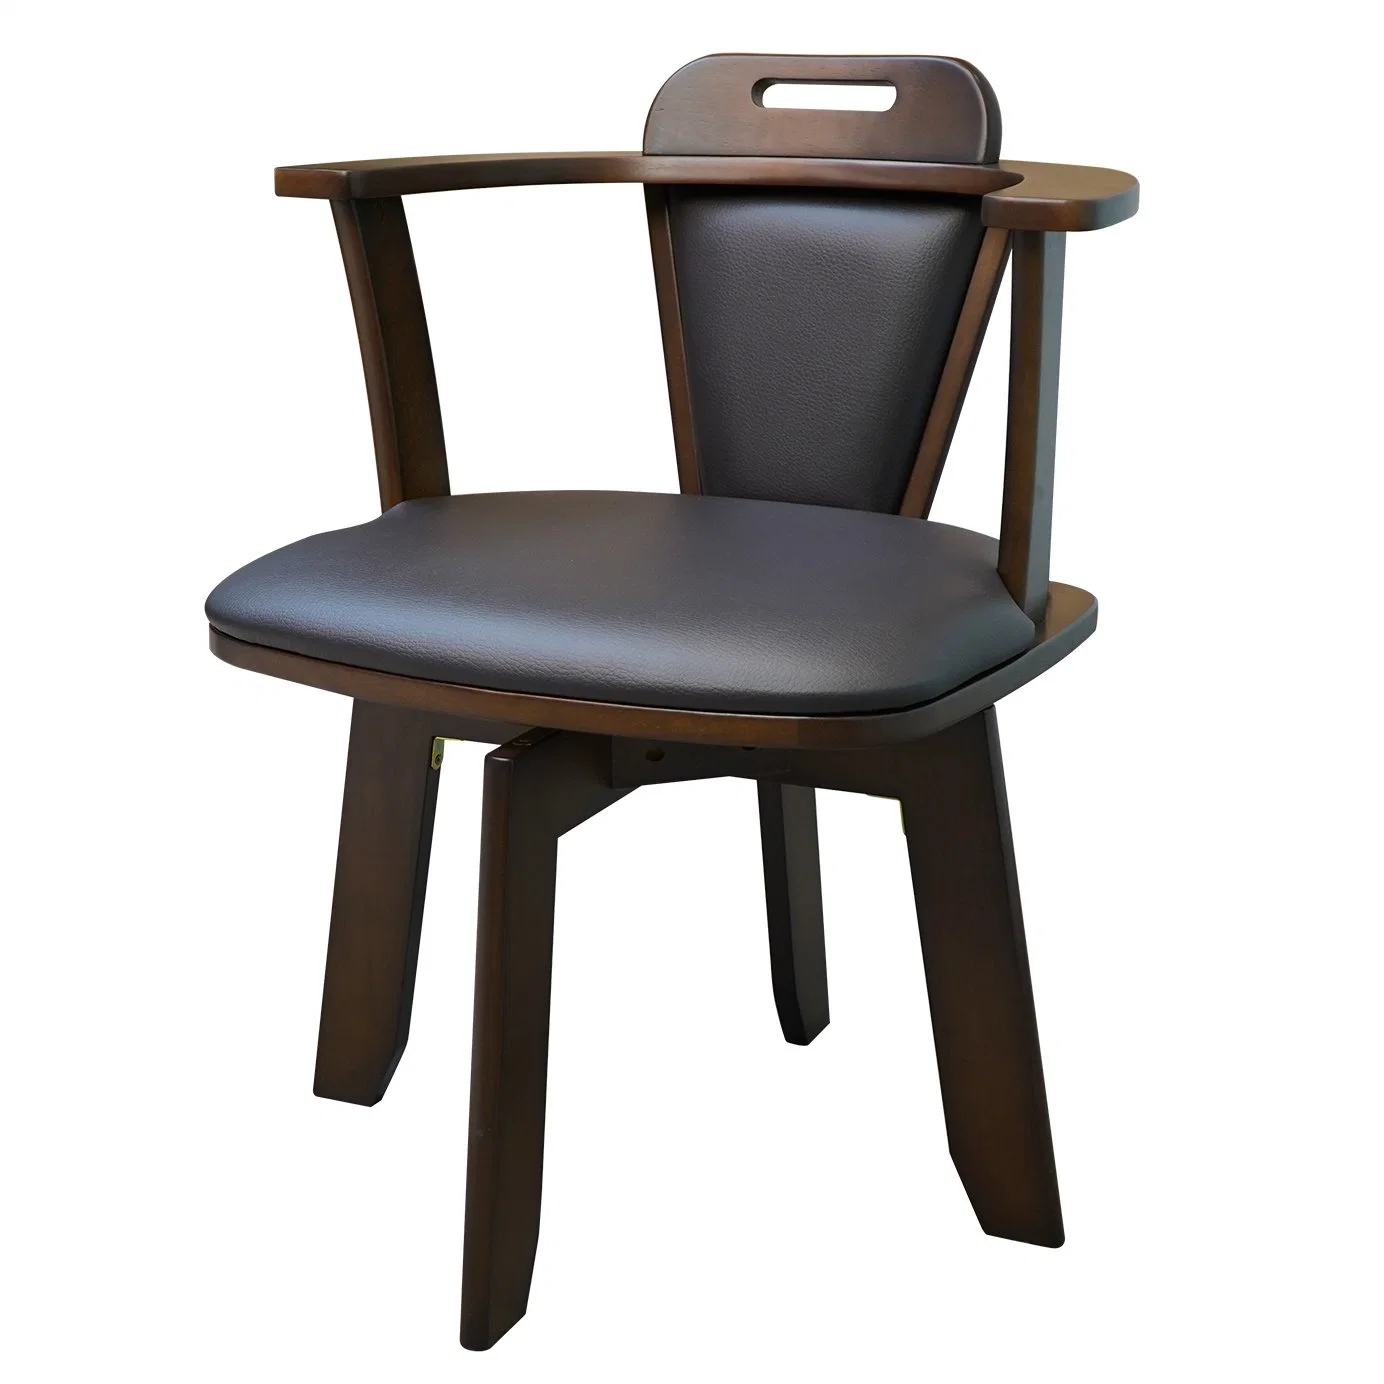 Solid Wood Swivel Dining Chair Office Chair Desk Chair